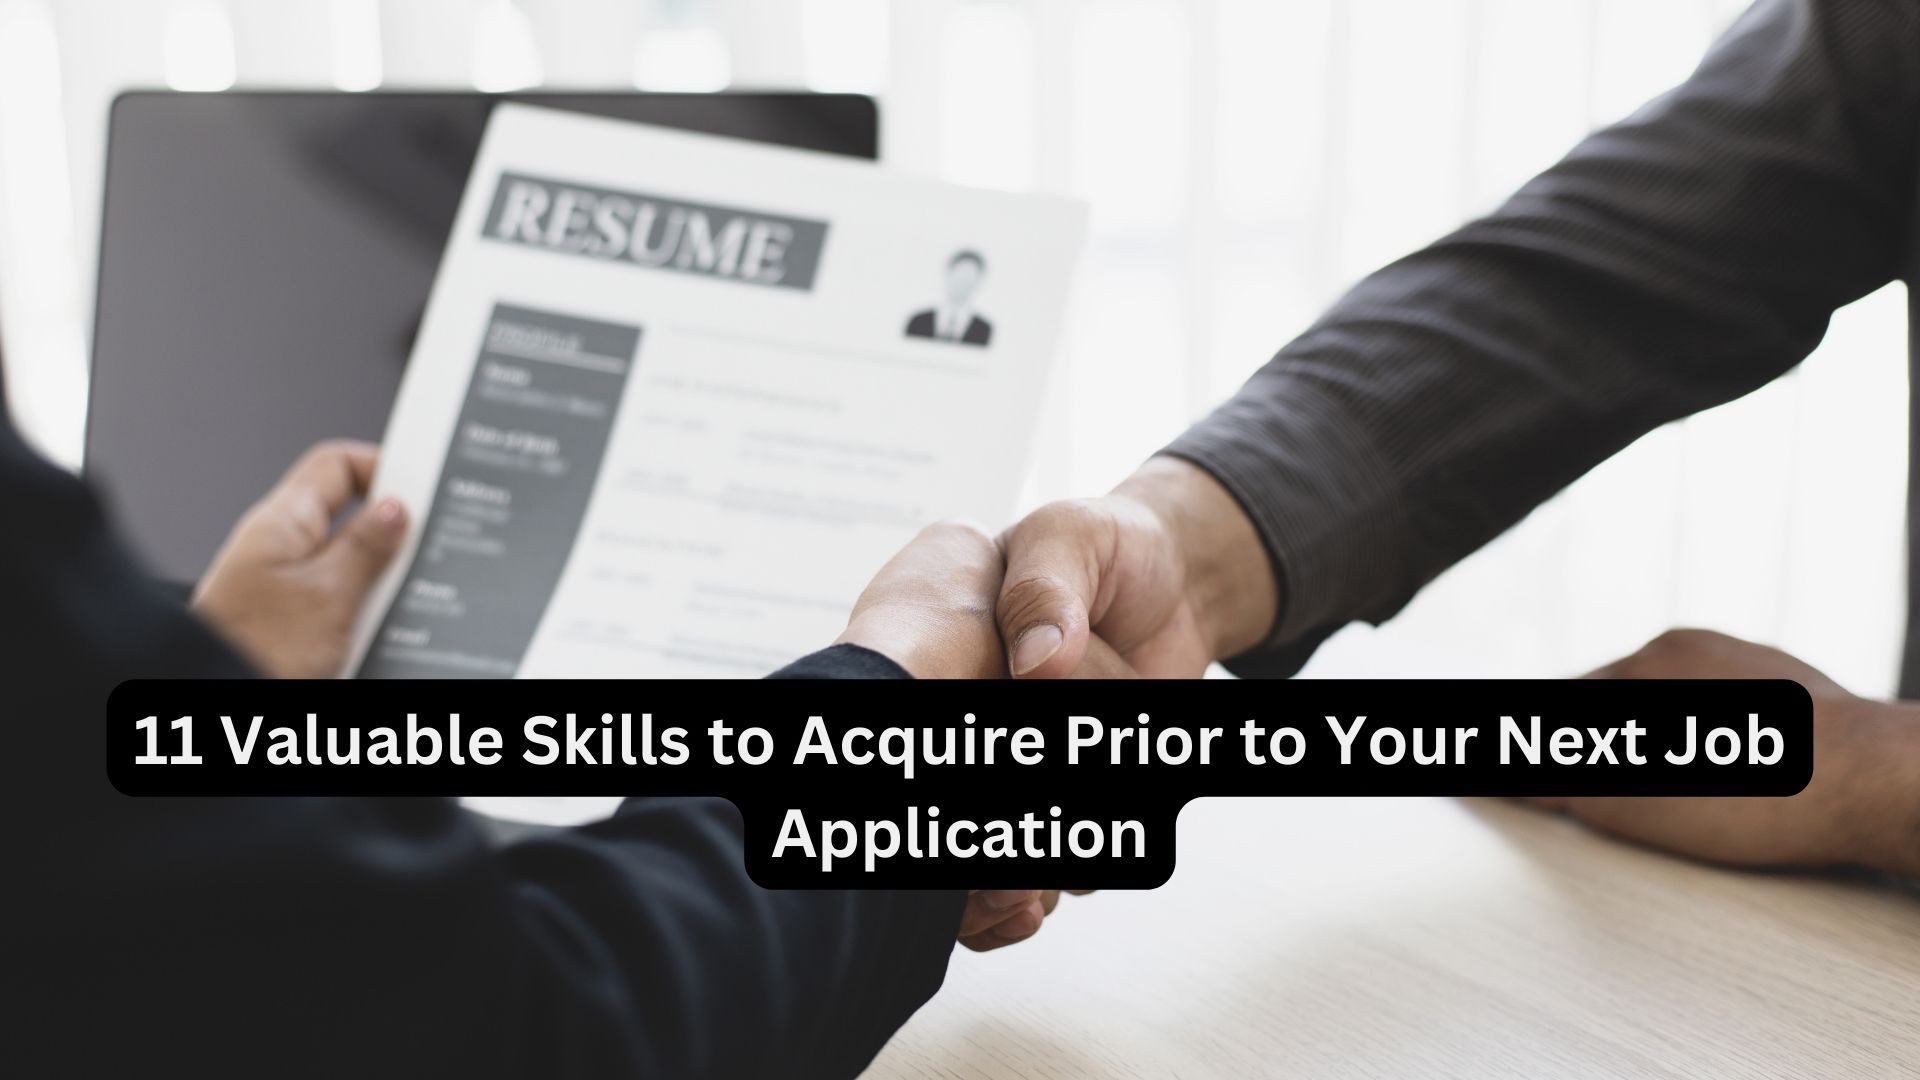 11 Valuable Skills to Acquire Prior to Your Next Job Application